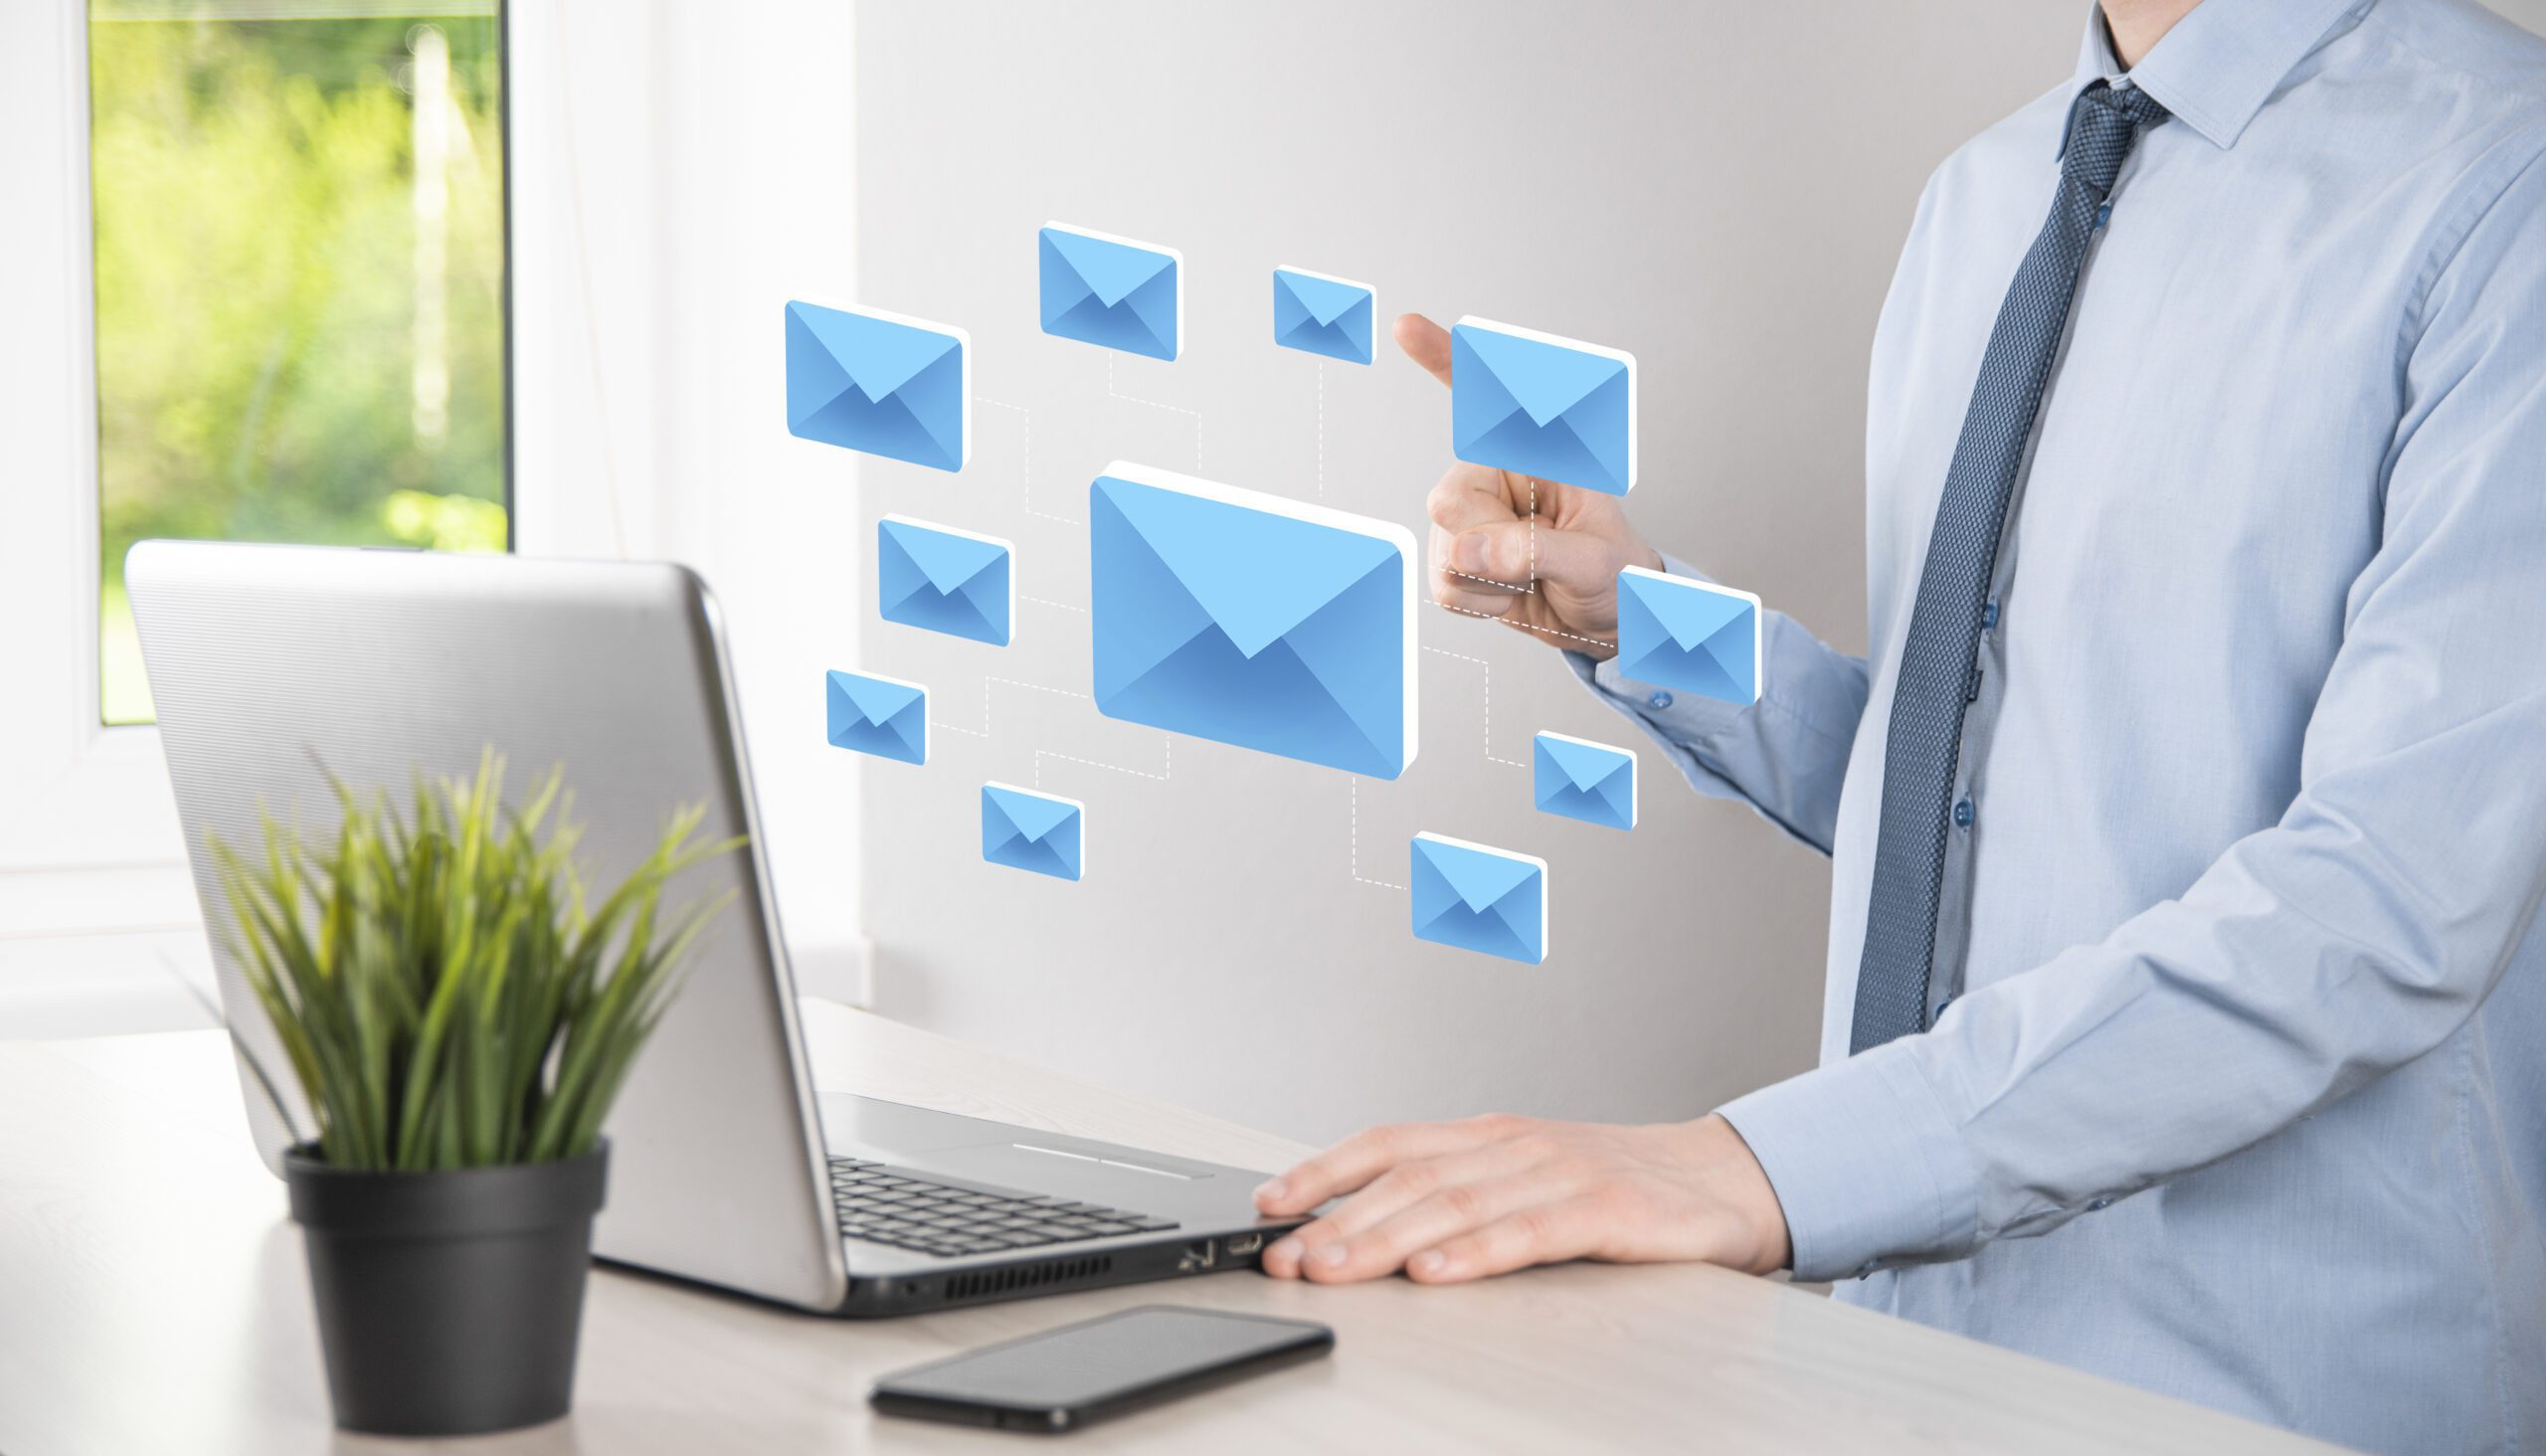 email marketing and newsletter conceptcontact us by newsletter email and protect your personal information from spam mail conceptscheme of direct sales in business list of clients for mailing scaled